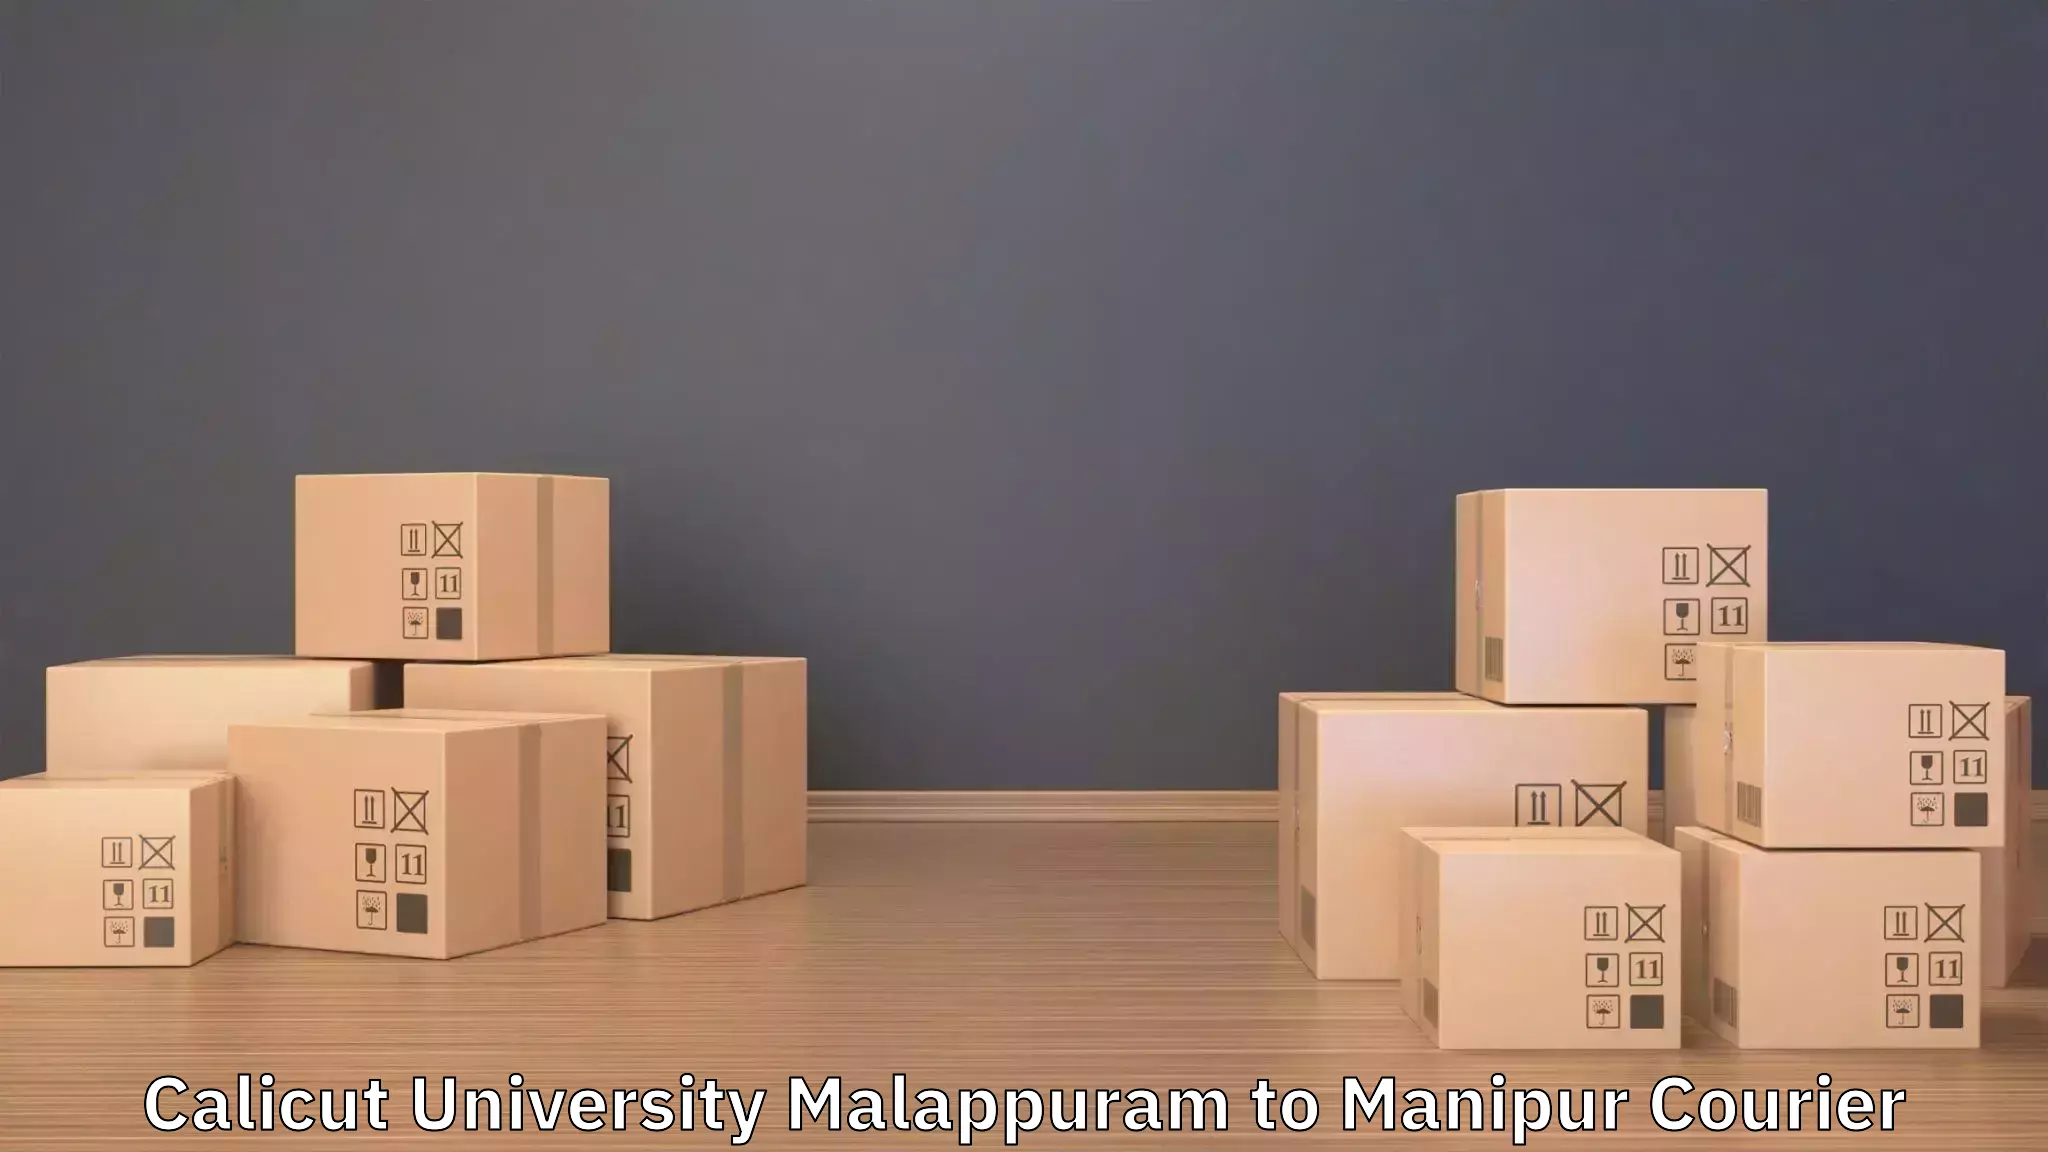 Affordable relocation services Calicut University Malappuram to Manipur